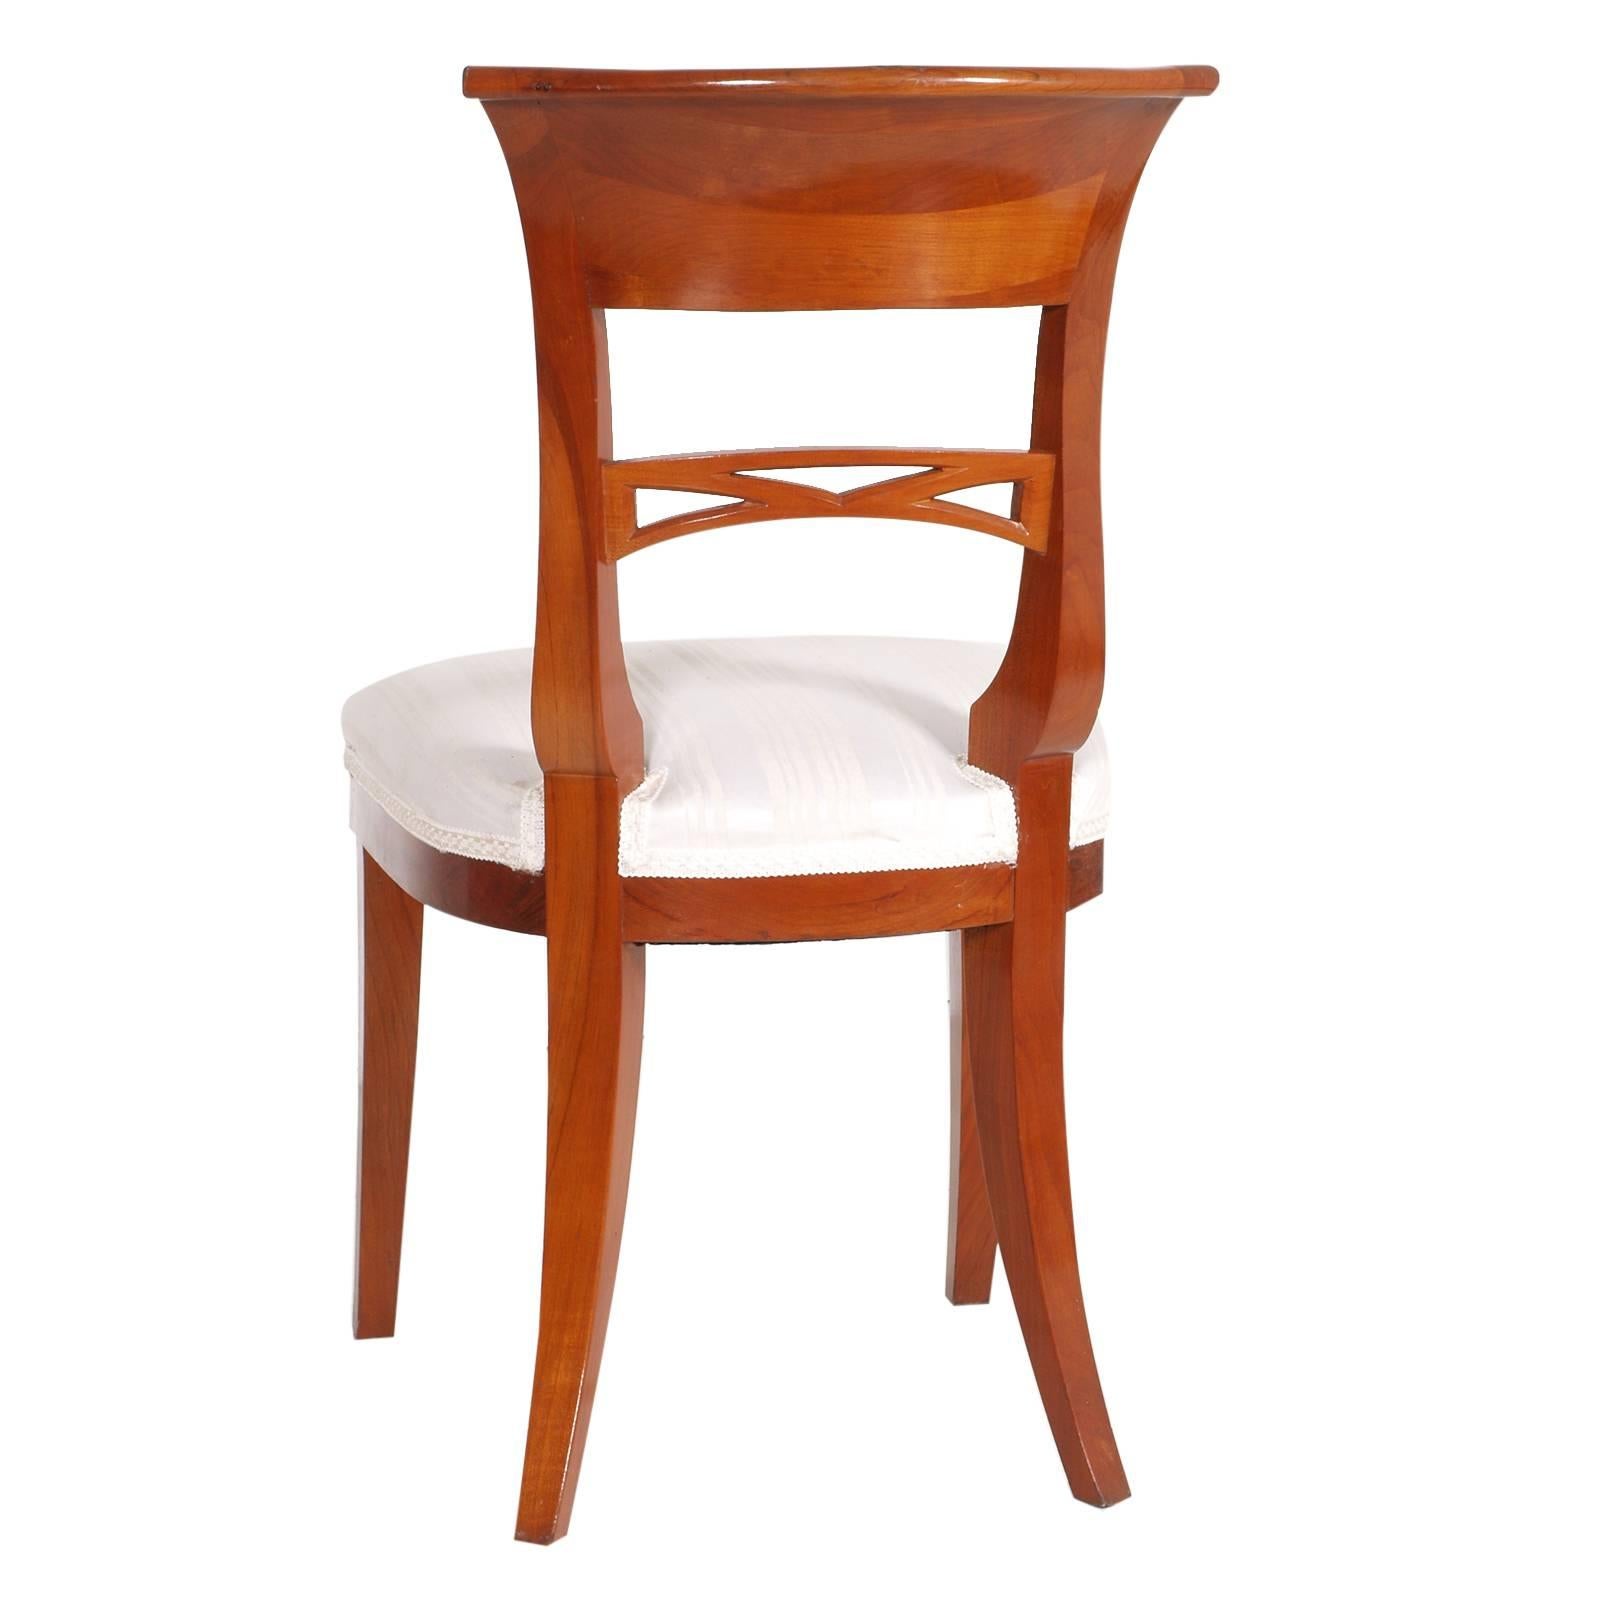 Italian Early 20th Century Biedermeier Chair in Cherrywood Restored and Polished to Wax For Sale